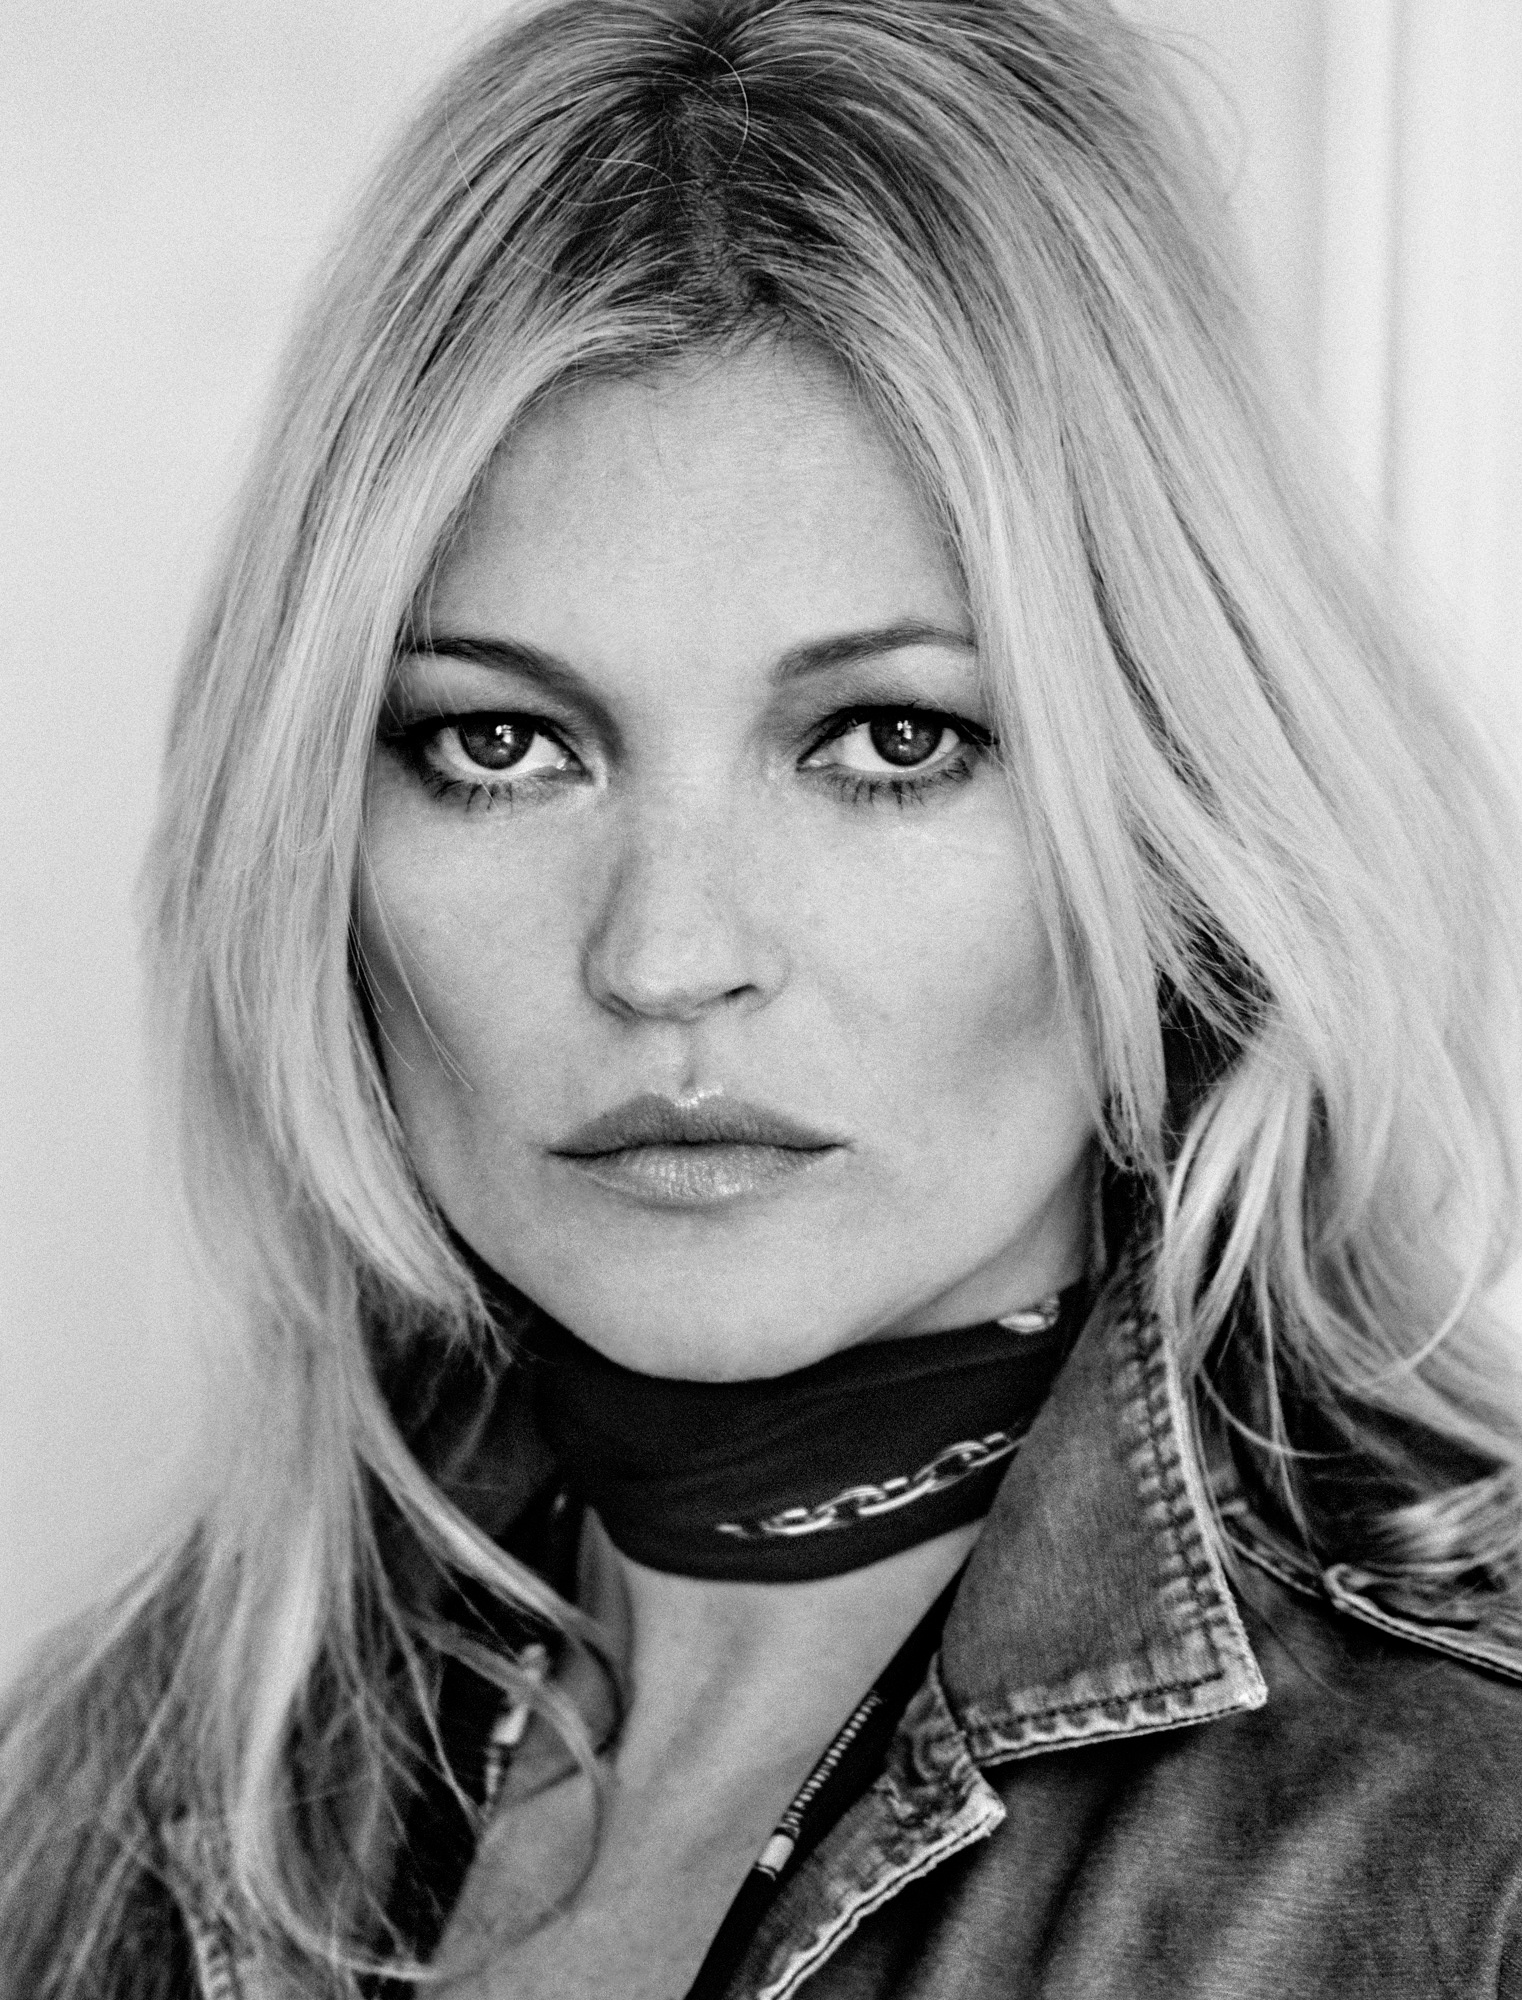 Kate Moss photo 2041 of 2305 pics, wallpaper - photo #857062 - ThePlace2